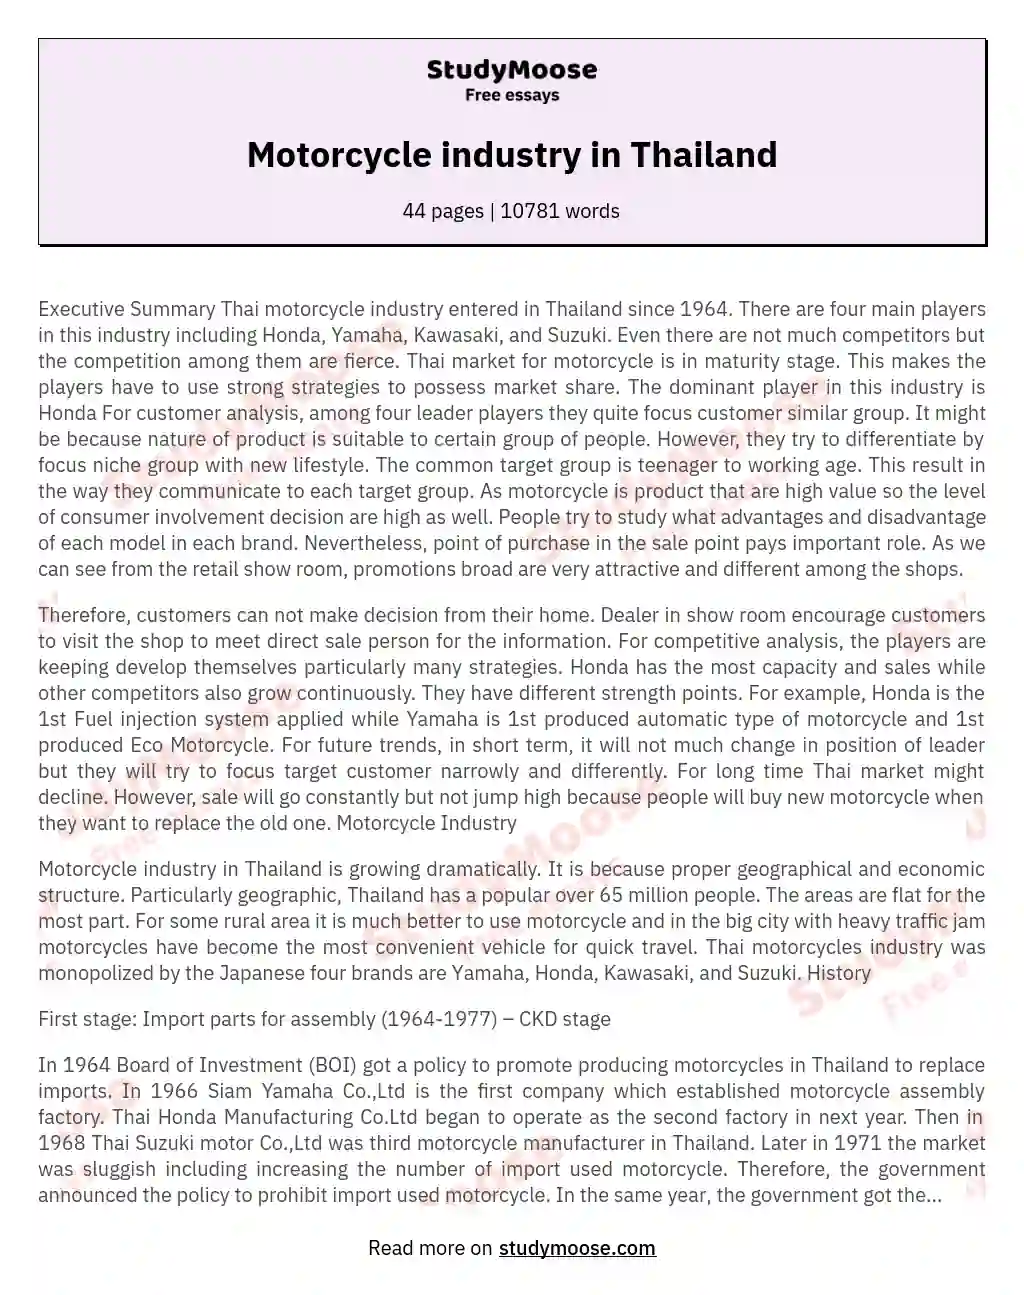 Motorcycle industry in Thailand